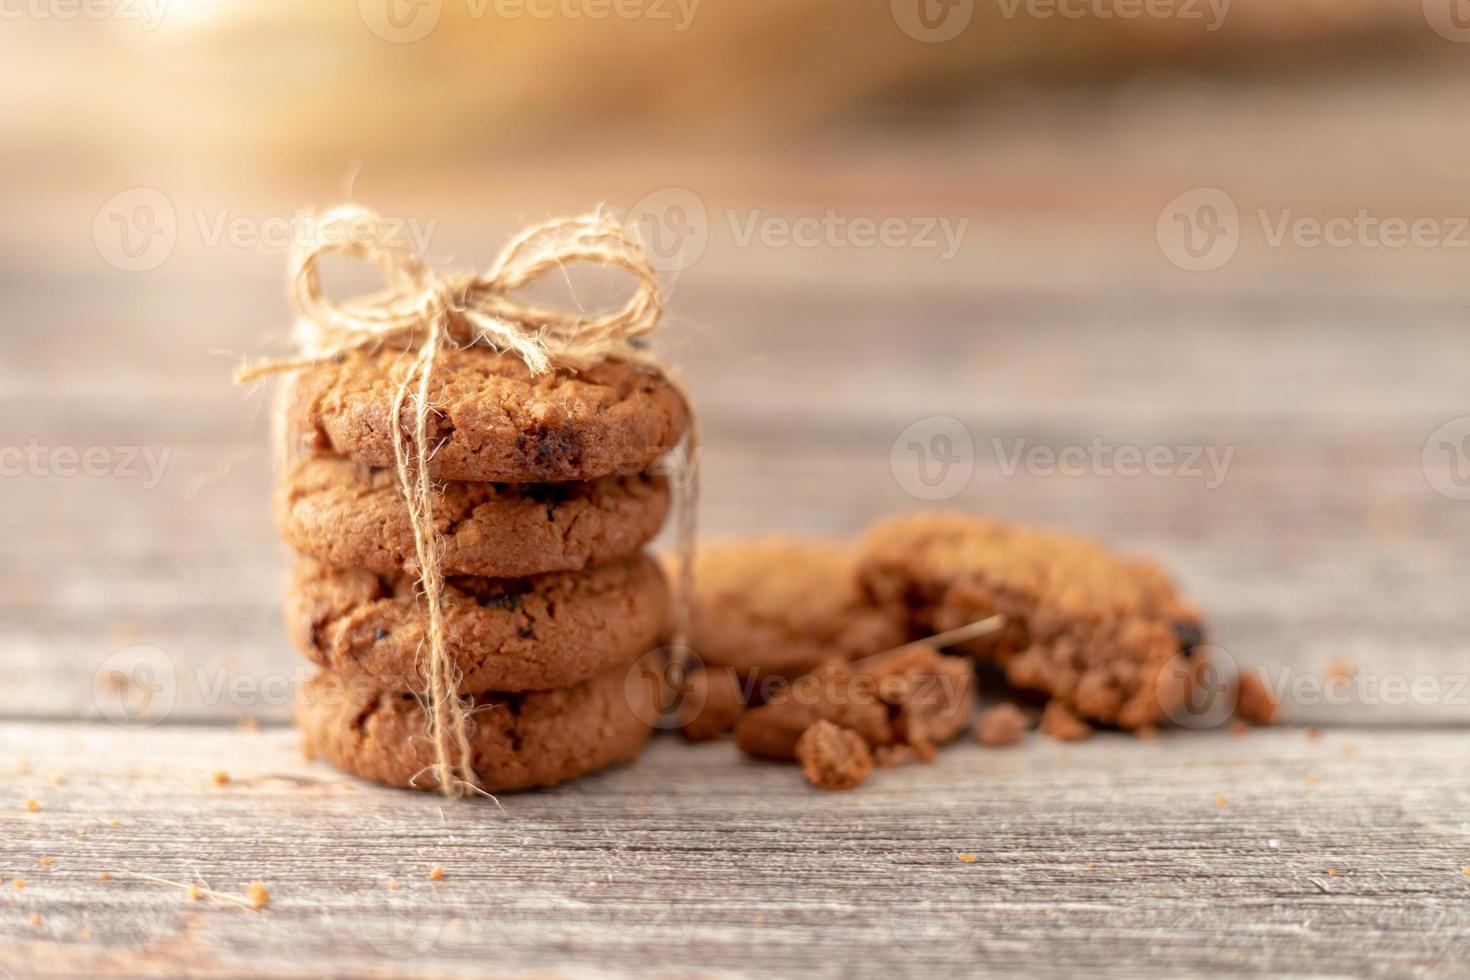 Stacked cookies use a rope tied on a wooden table photo